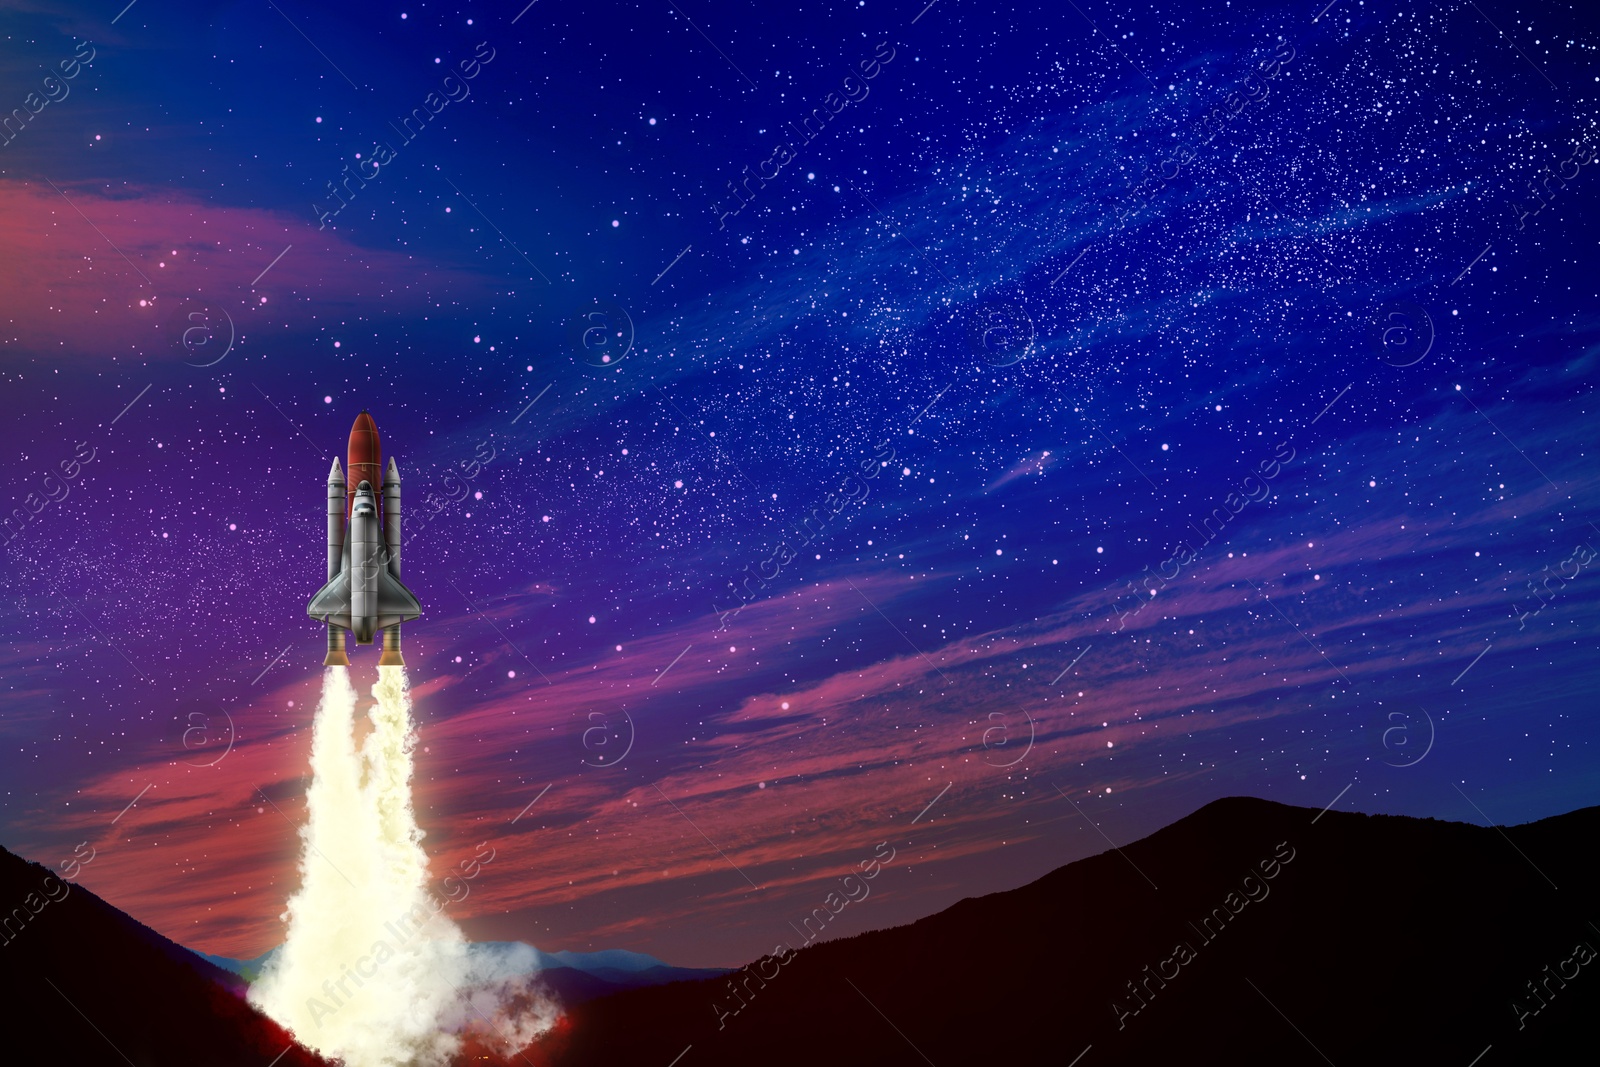 Image of Launch of space rocket in mountains against starry sky at night